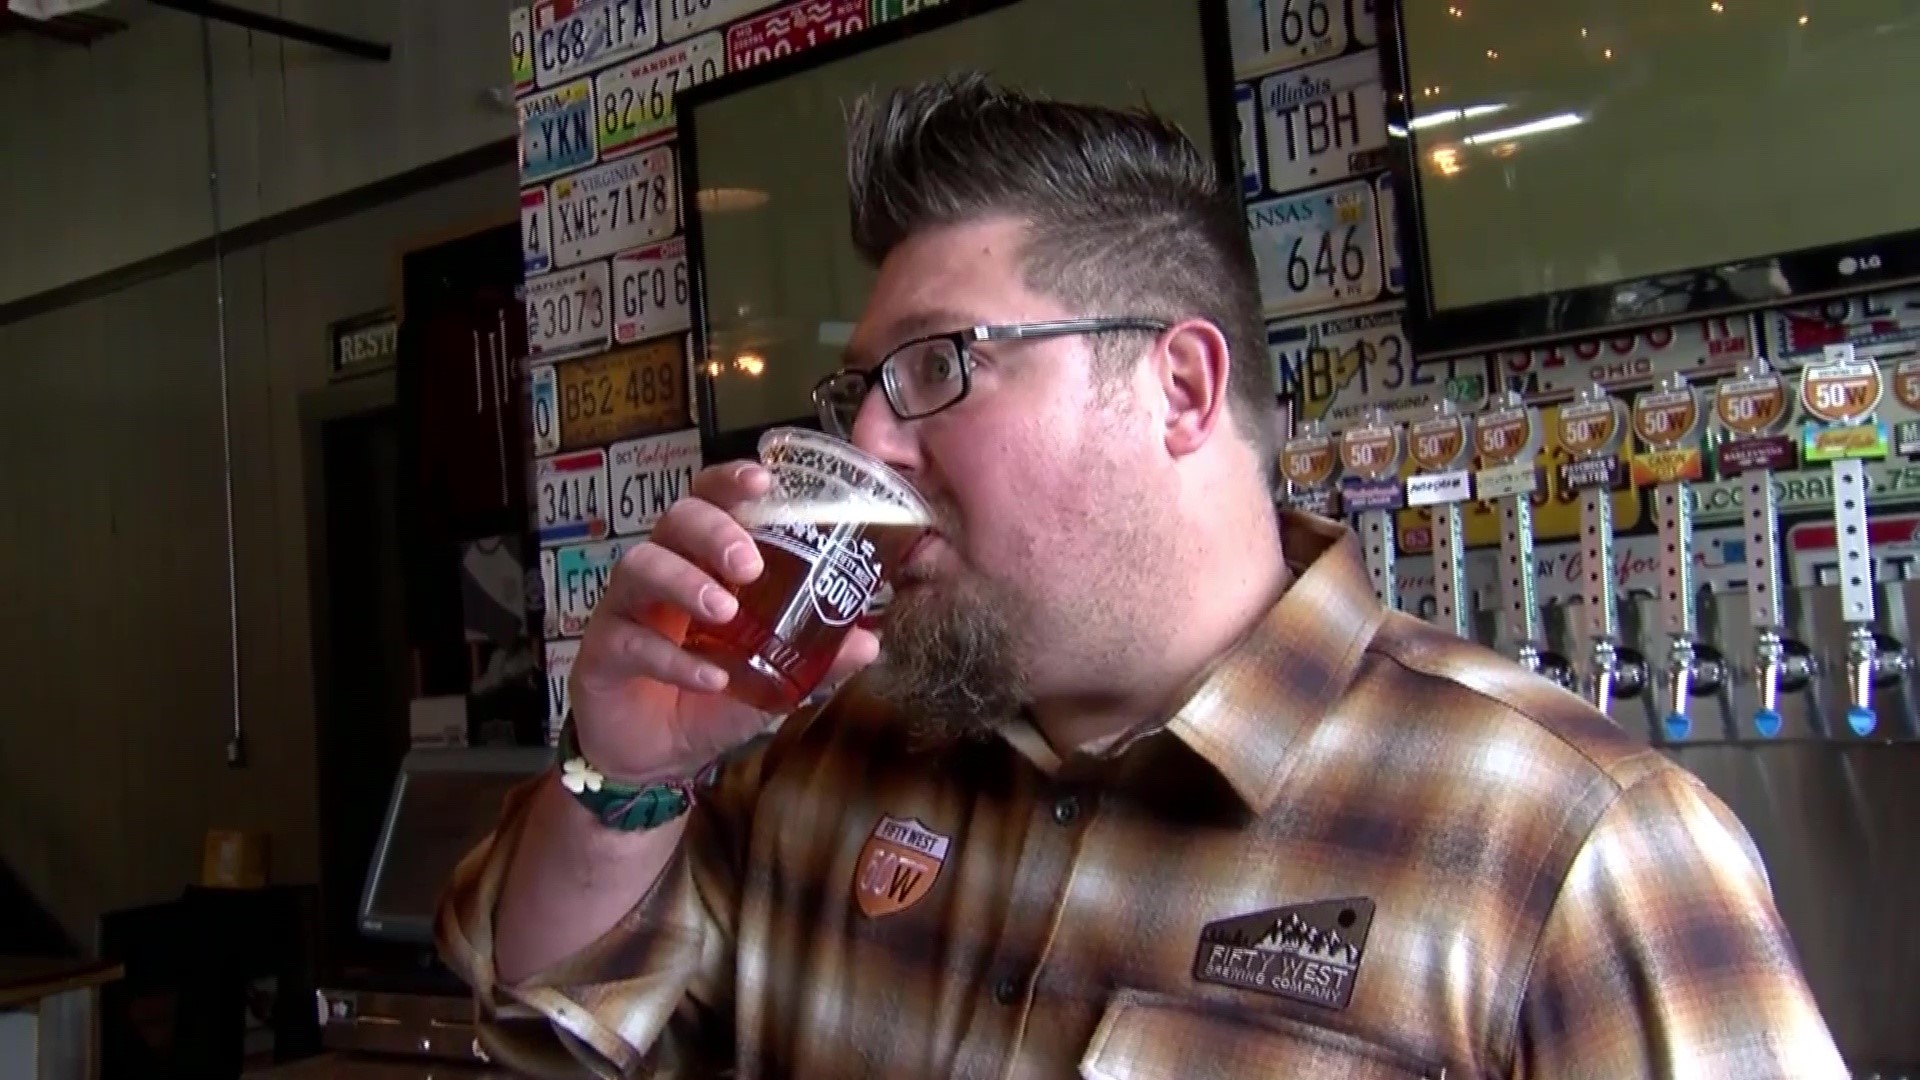 People typically give up beer or alcohol for Lent, but Del Hall says he's only going to drink beer and nothing else.